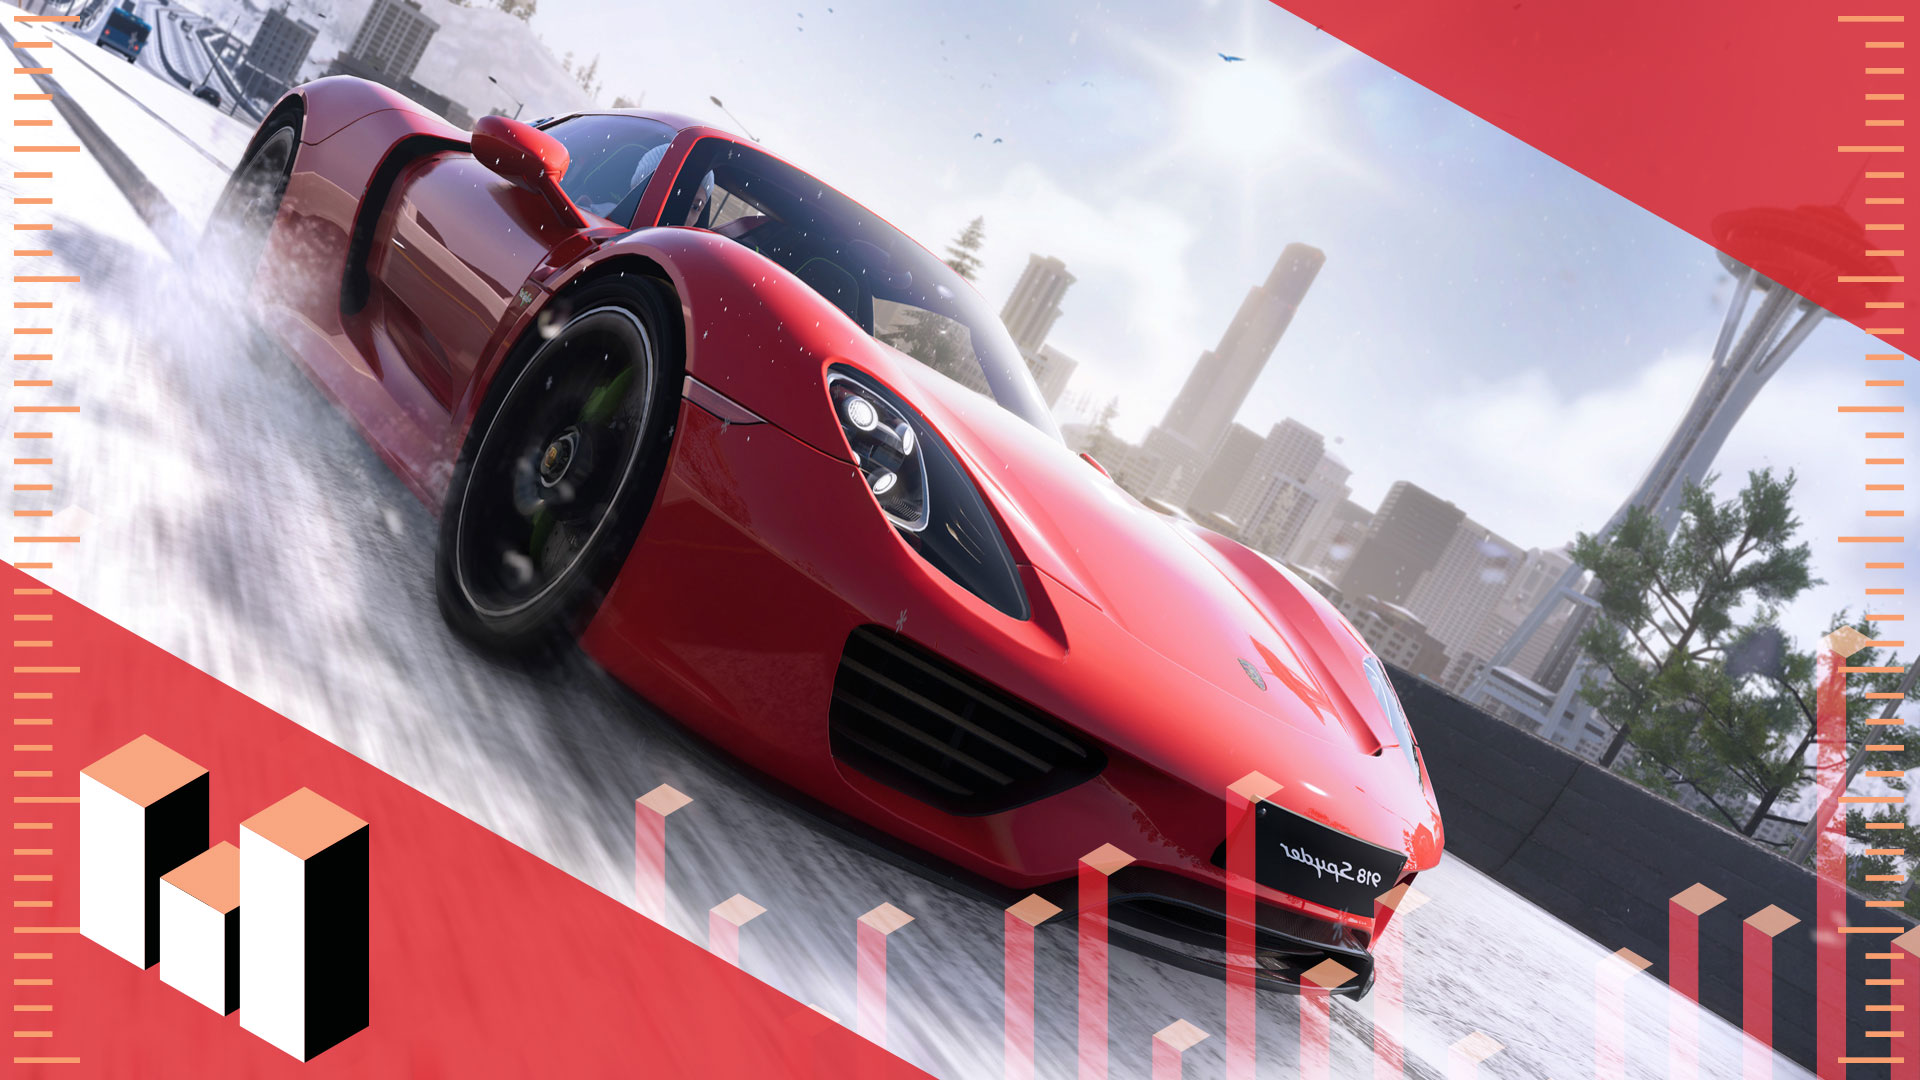 The Crew series reaches over 40 million players - The Crew 2 - Gamereactor